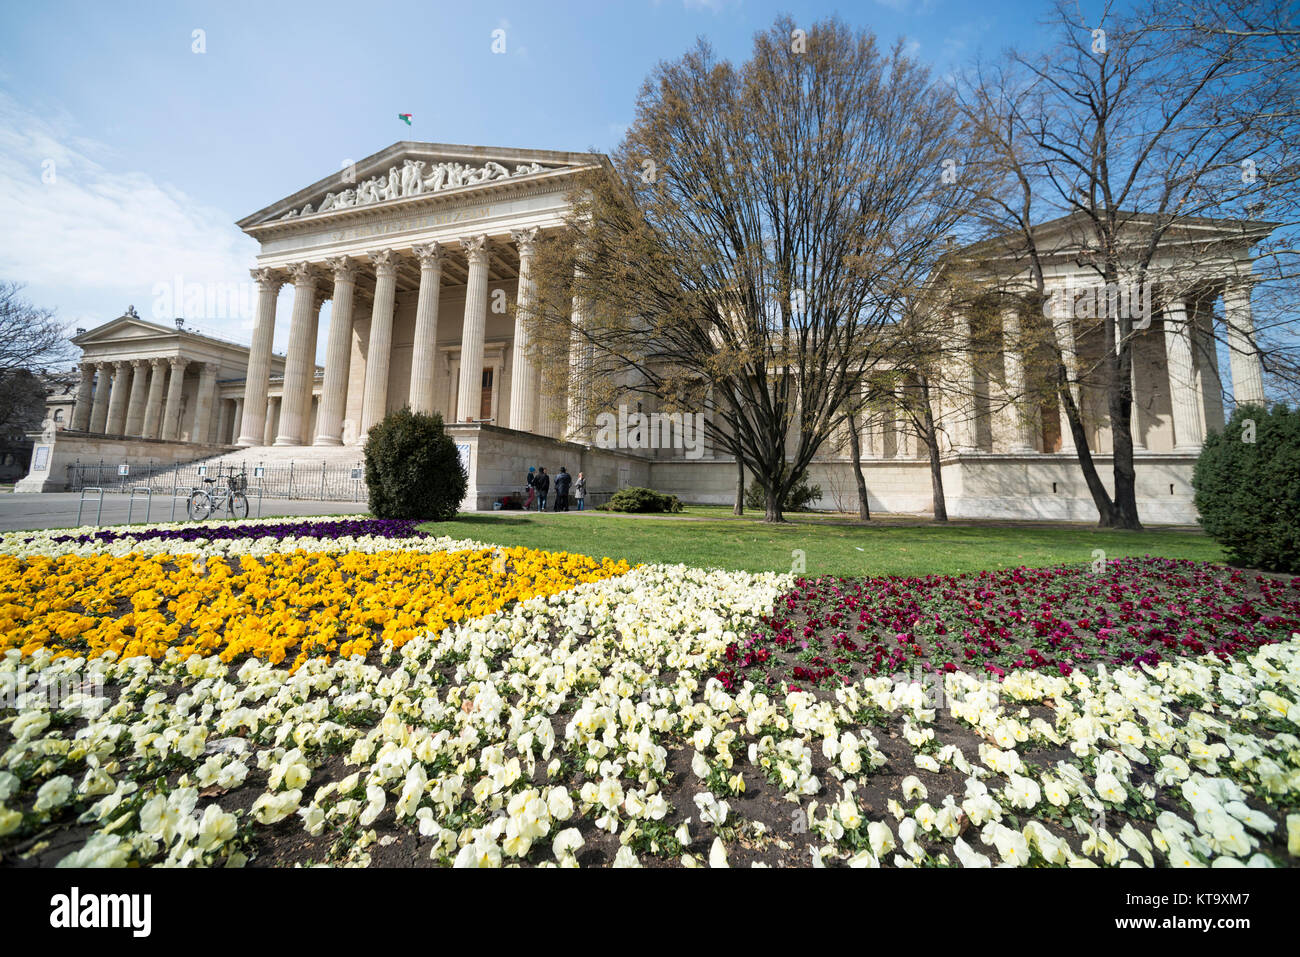 Budapest, Hungary. 28 March, 2015. The Museum of Fine Art. Credit: Ian Jacobs/Alamy Stock Photo